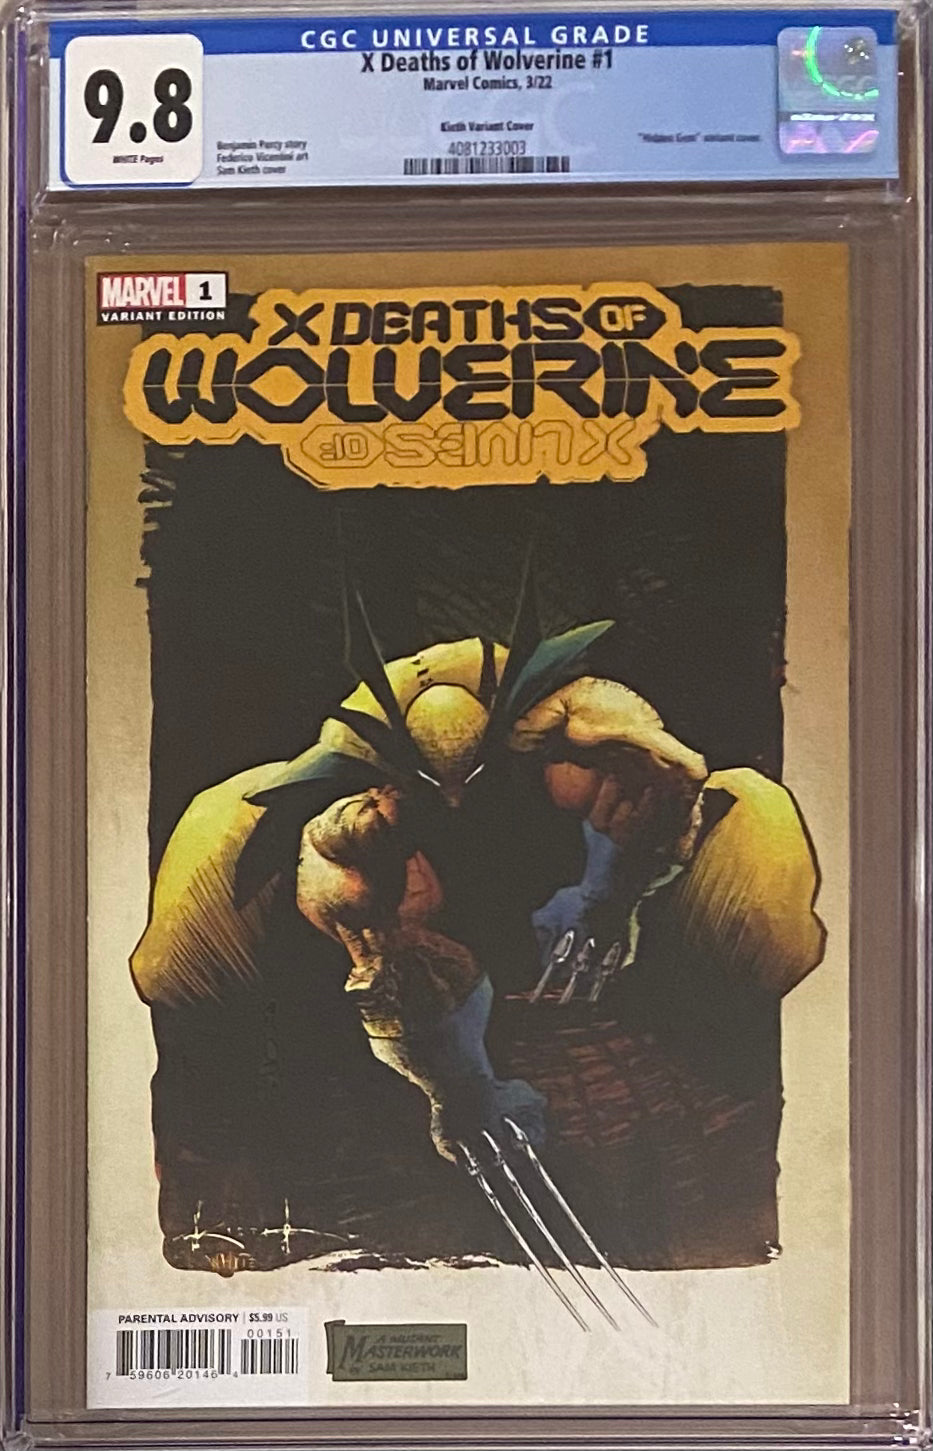 X Deaths of Wolverine #1 Keith 1:100 Retailer Incentive Variant CGC 9.8